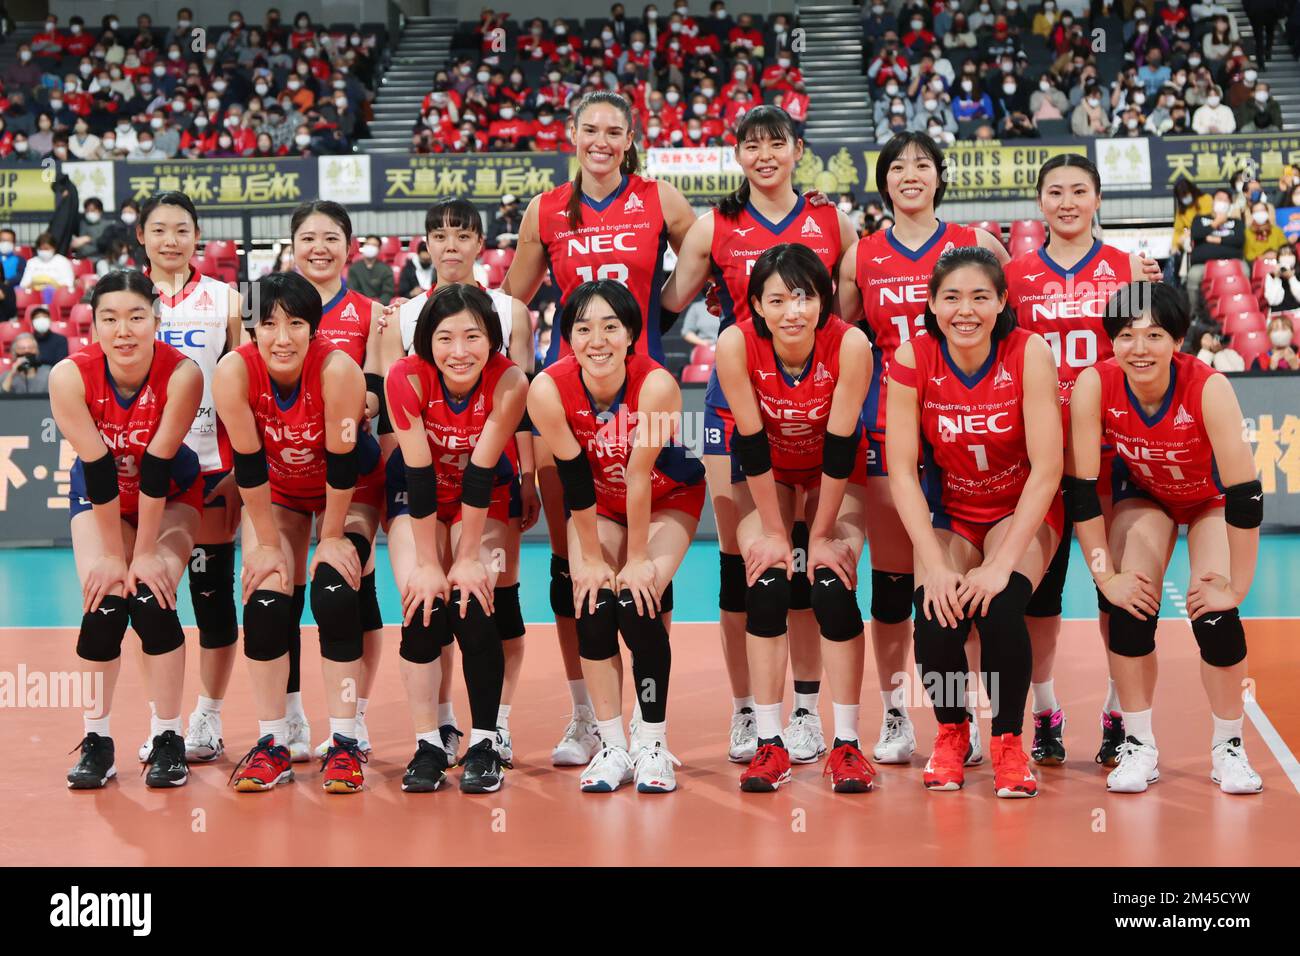 Tokyo Gymnasium, Tokyo, Japan. 18th Dec, 2022. NEC Red Rockets team group  line-up, DECEMBER 18, 2022 - Volleyball : 2022 All Japan Women's Volleyball  Championships (Empress's Cup) Final match between NEC Red